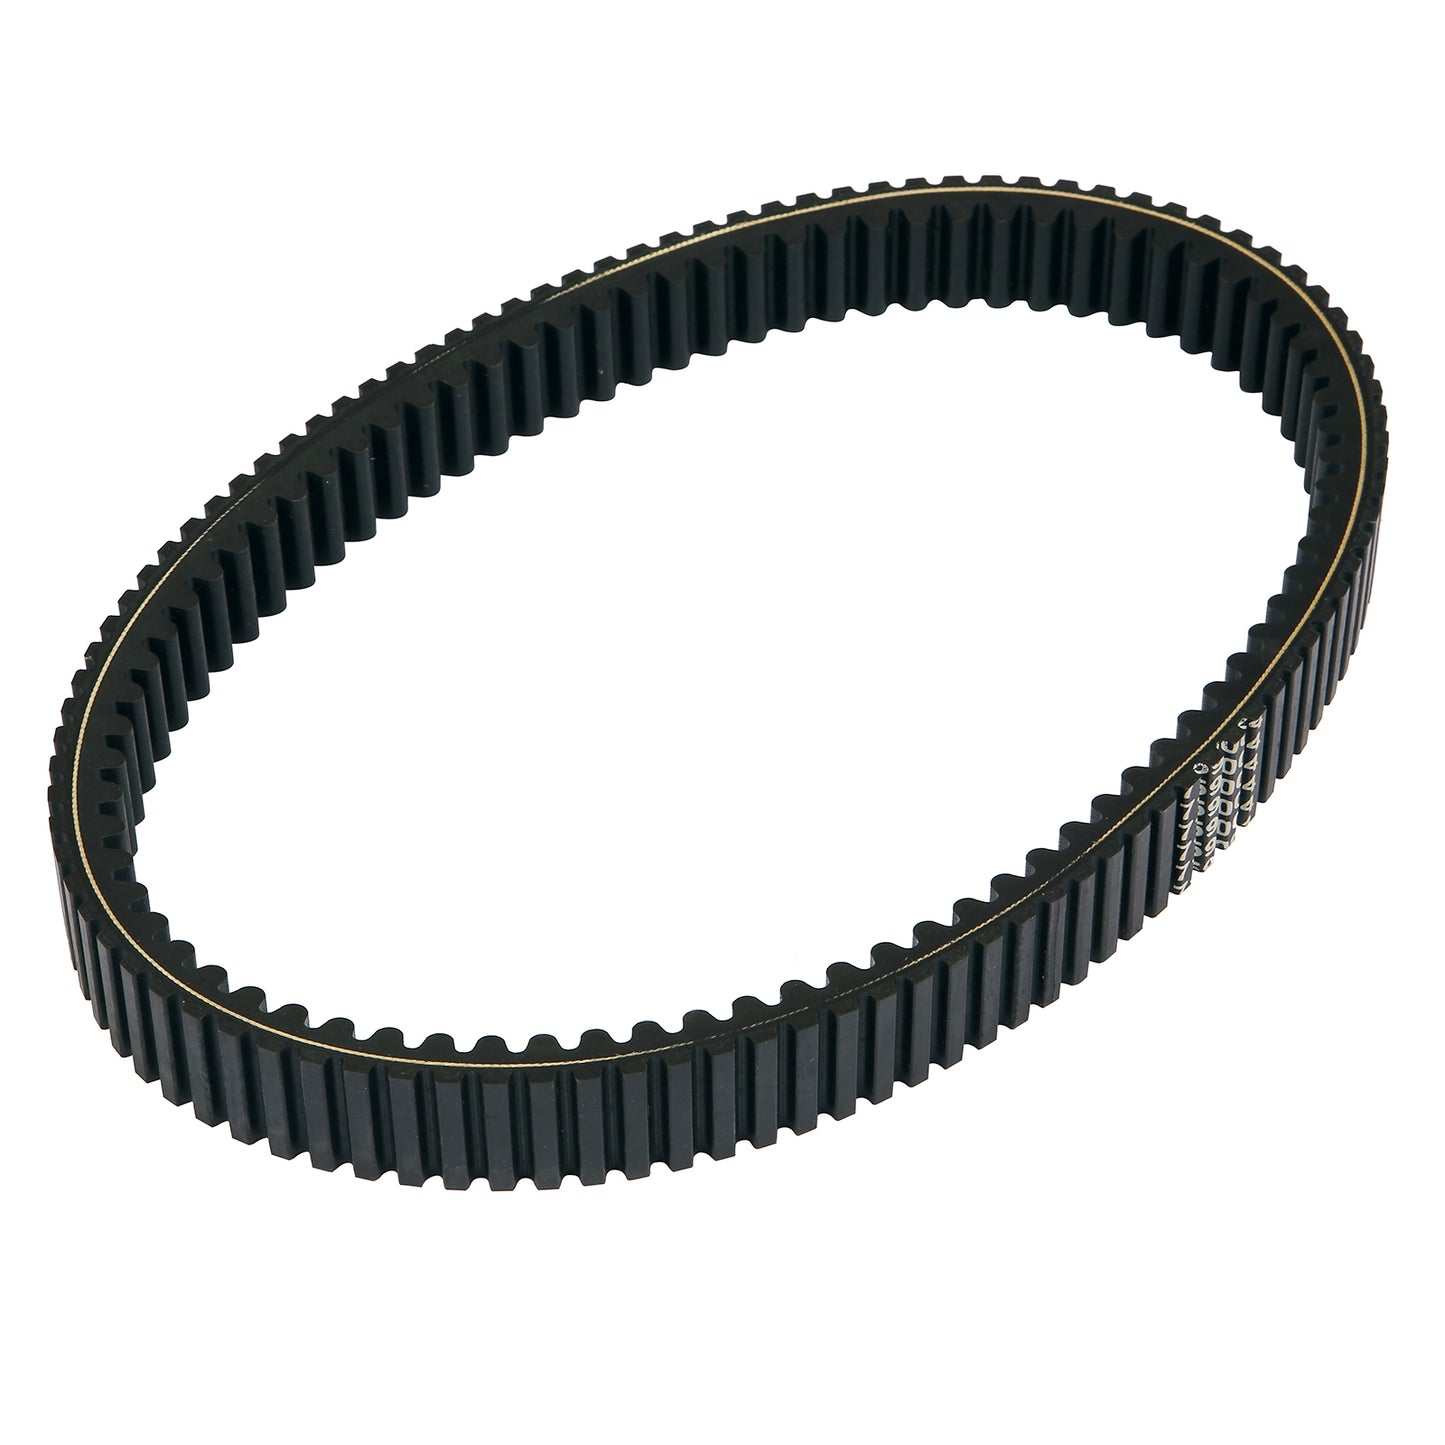 CAM-49VS4266 Can Am Belt Drive Belts for for 2021 Can-Am Commander Max 1000R XT 1000R DPS 1000R XT 1000R XT-P Max 1000R DPS